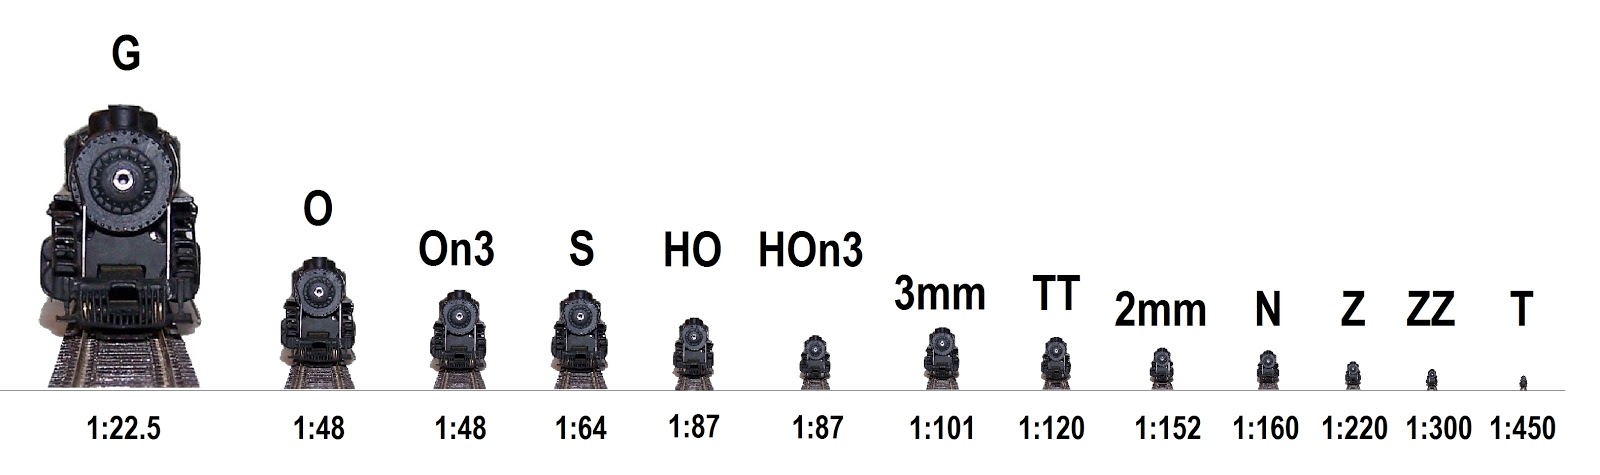 Chinook Hobby Talk: Model Railroading Scales - What Do the Letters Mean?